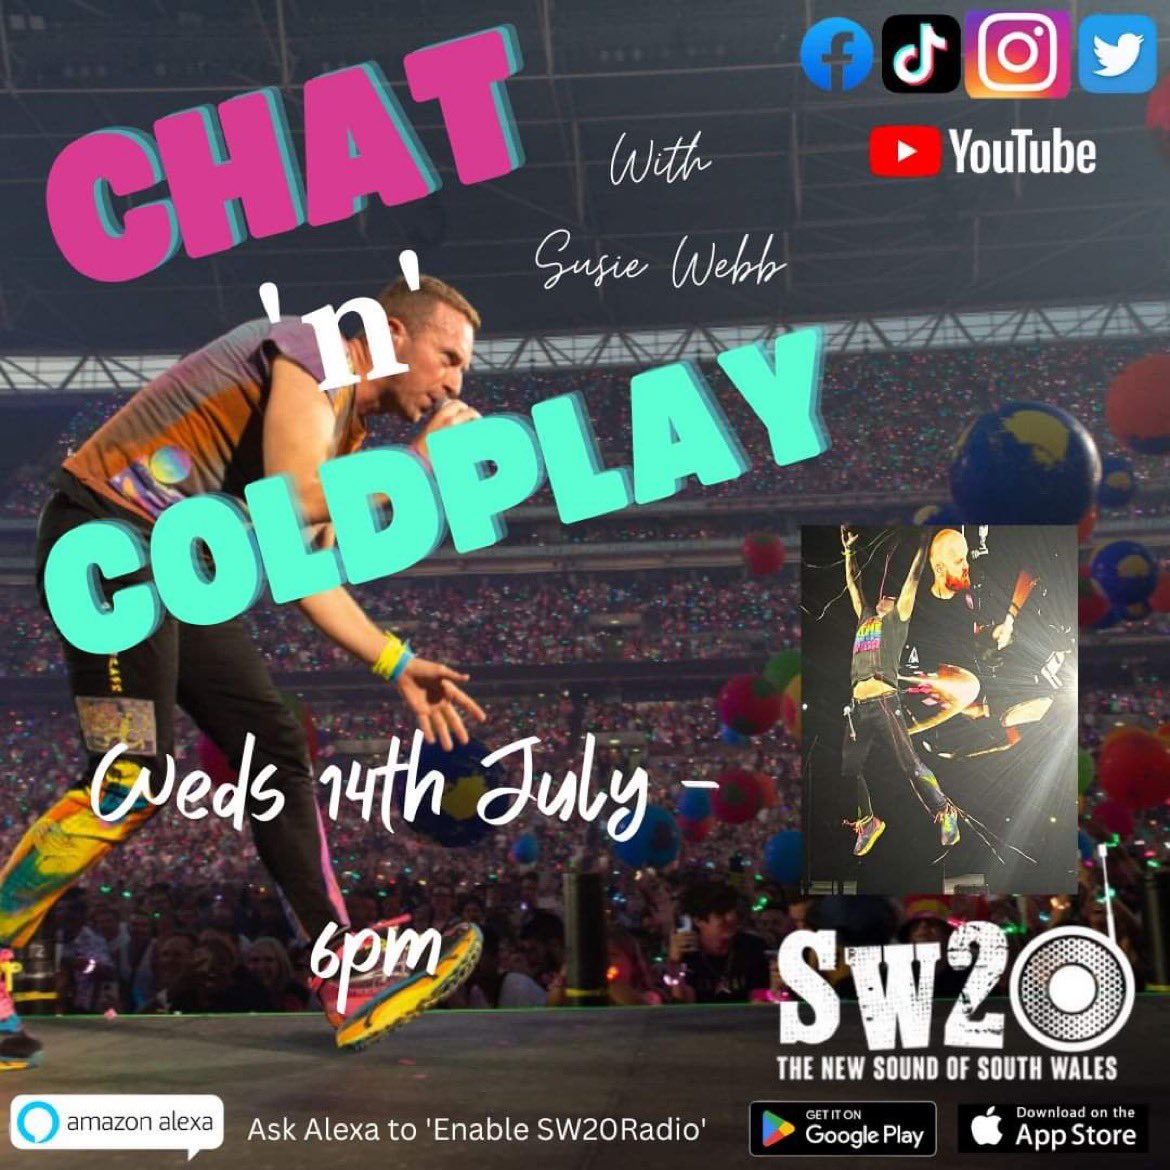 If you are suffering withdrawals, then never fear, the energy will be here and high this Weds nigh……t at 6pm on @SW20Radio - join me to hear @coldplay #higherpower #fan #chatnchoons #chrismartin #sw20radio #localradio #broadcasting #presenter